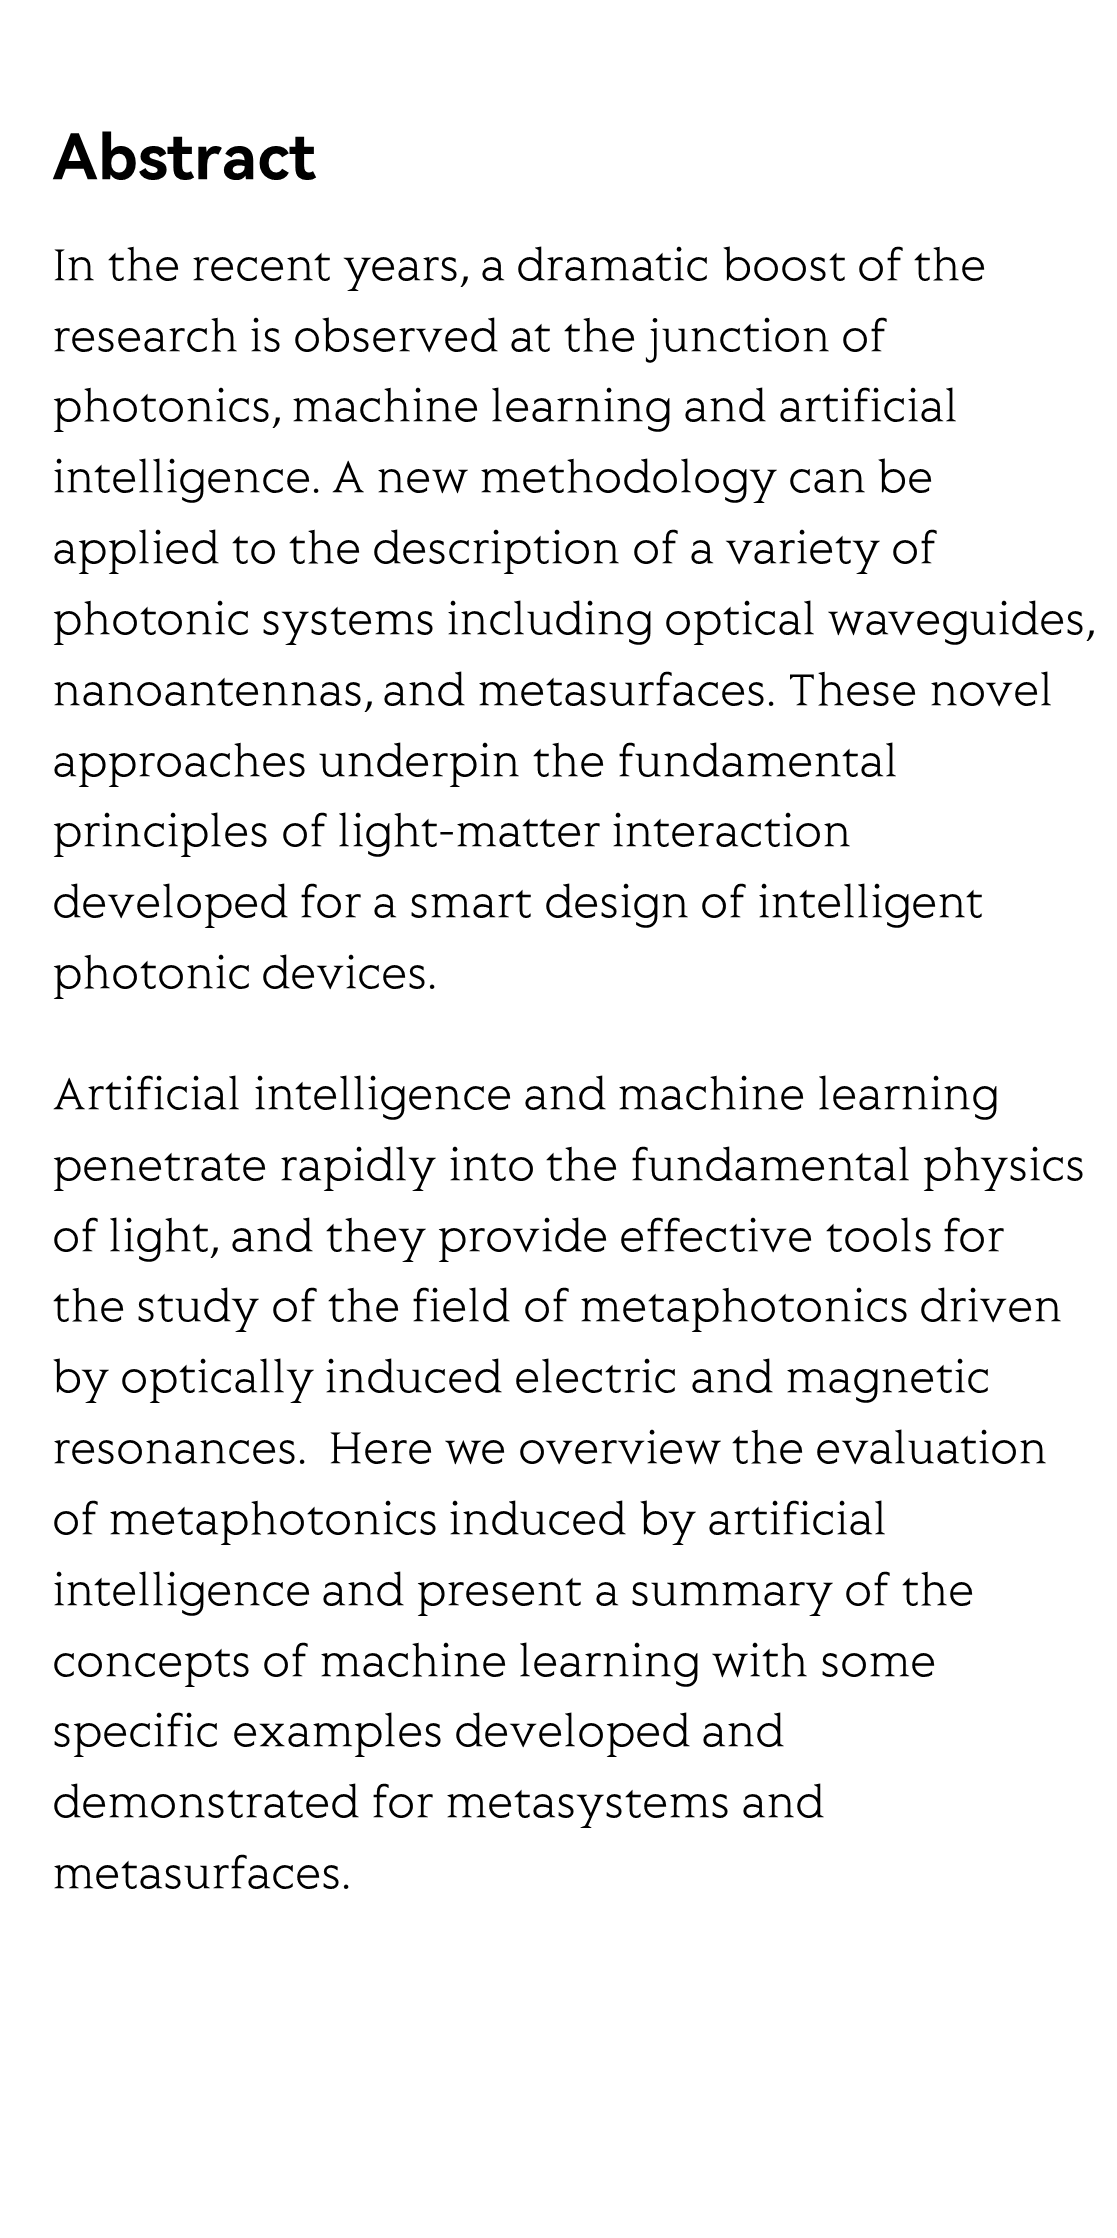 Intelligent metaphotonics empowered by machine learning_2